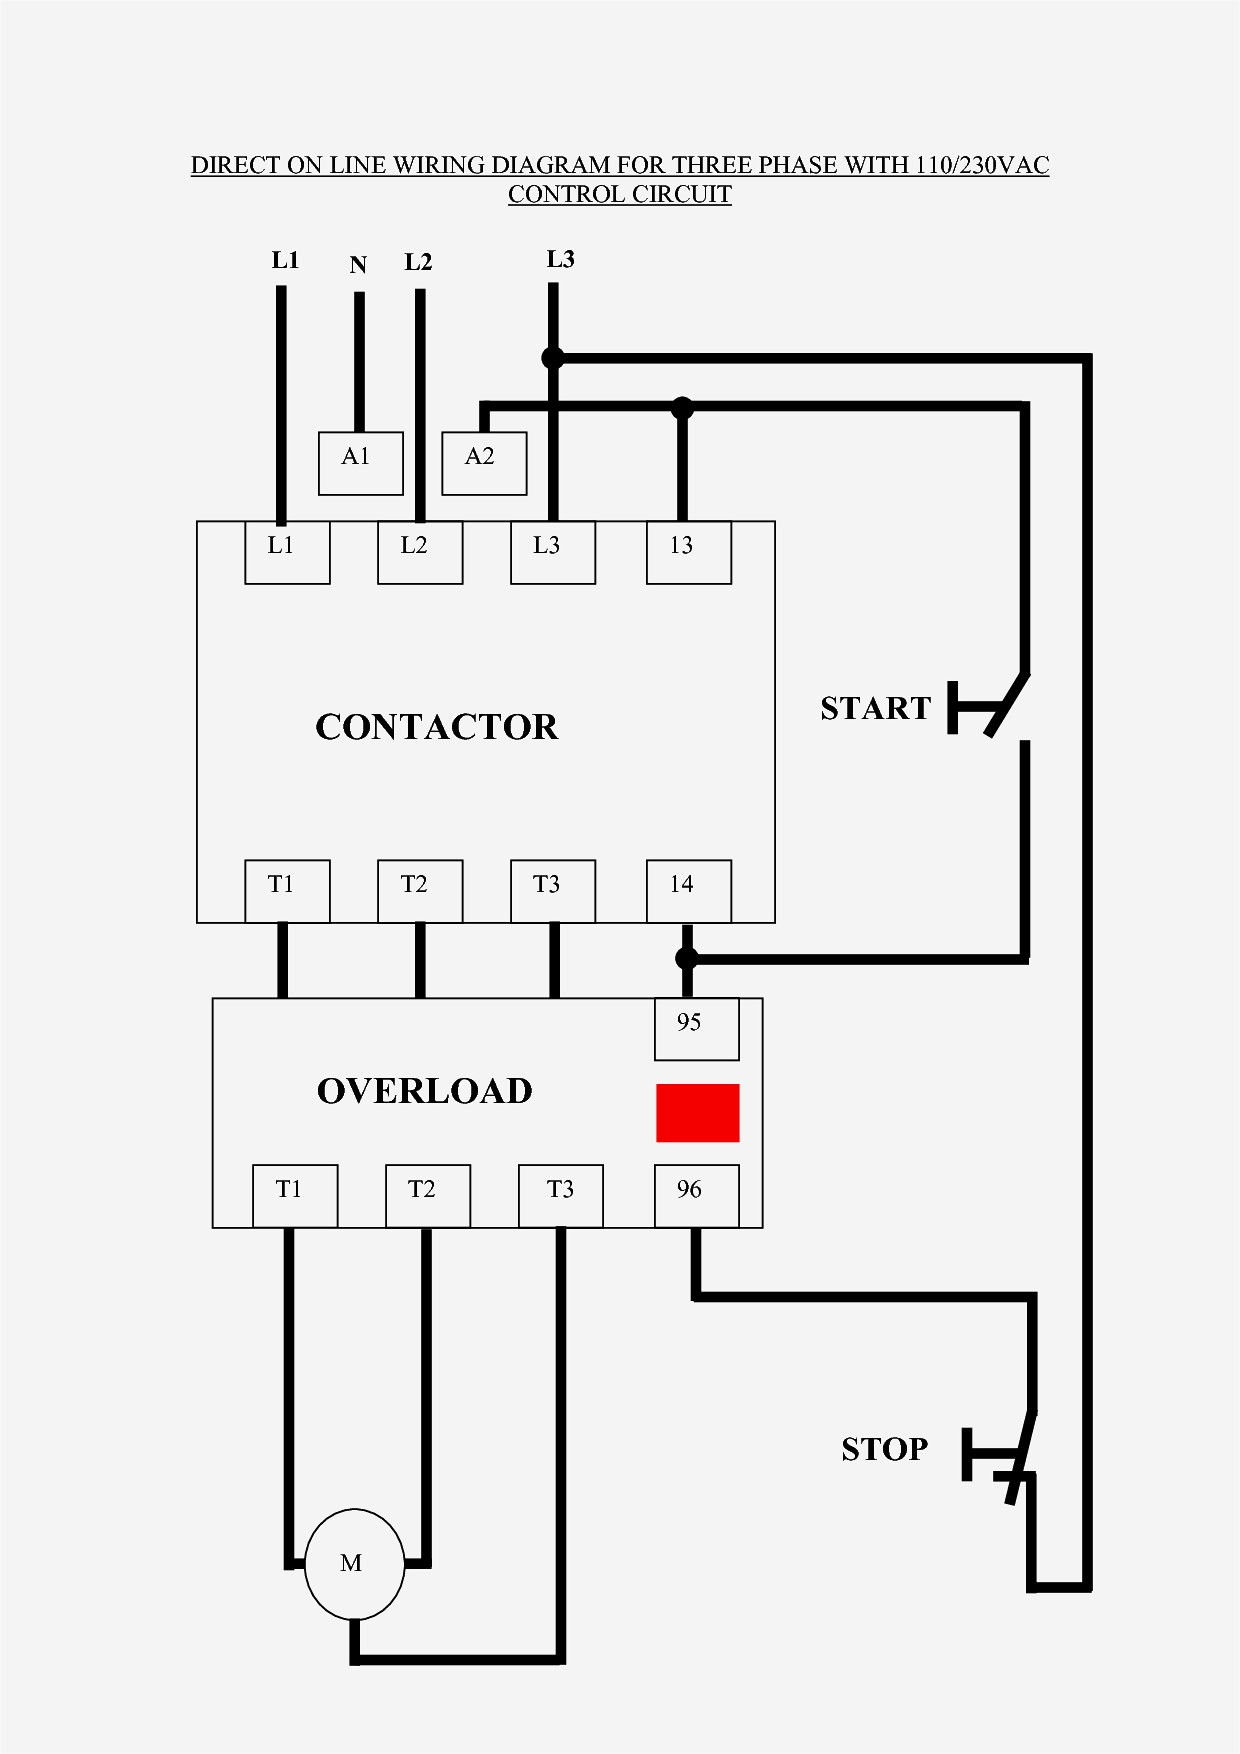 Phone Line Wiring Diagram 3 Phase Contactor Wiring Wiring Diagram Local